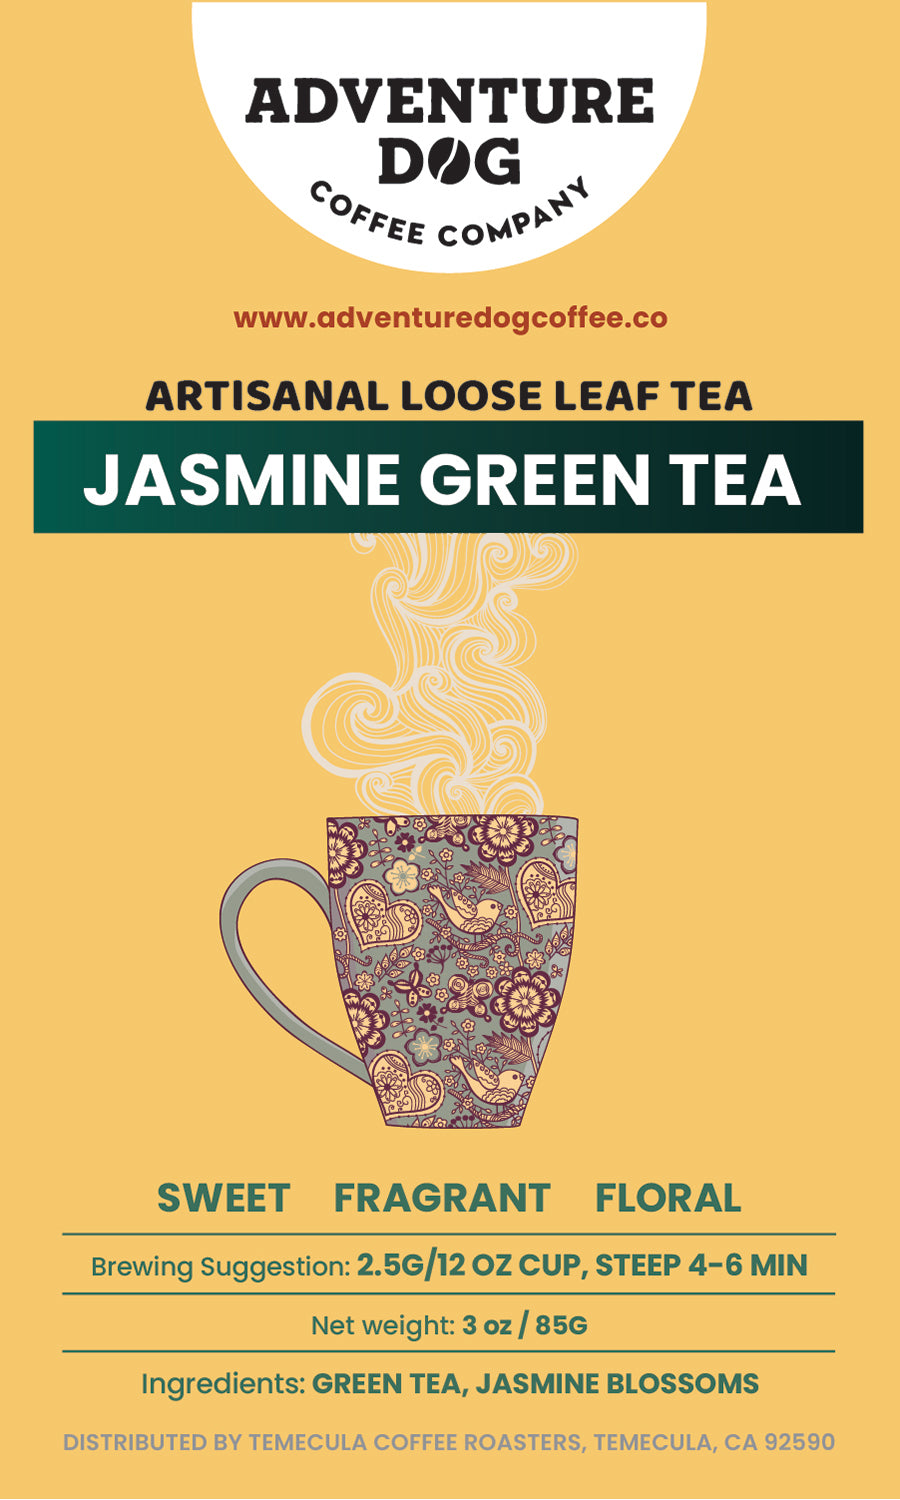 Jasmine Green Tea | Artisanal Loose Leaf label. Flavor notes are sweet, fragrant, and floral. Ingredients: Green Tea and Jasmine Blossoms